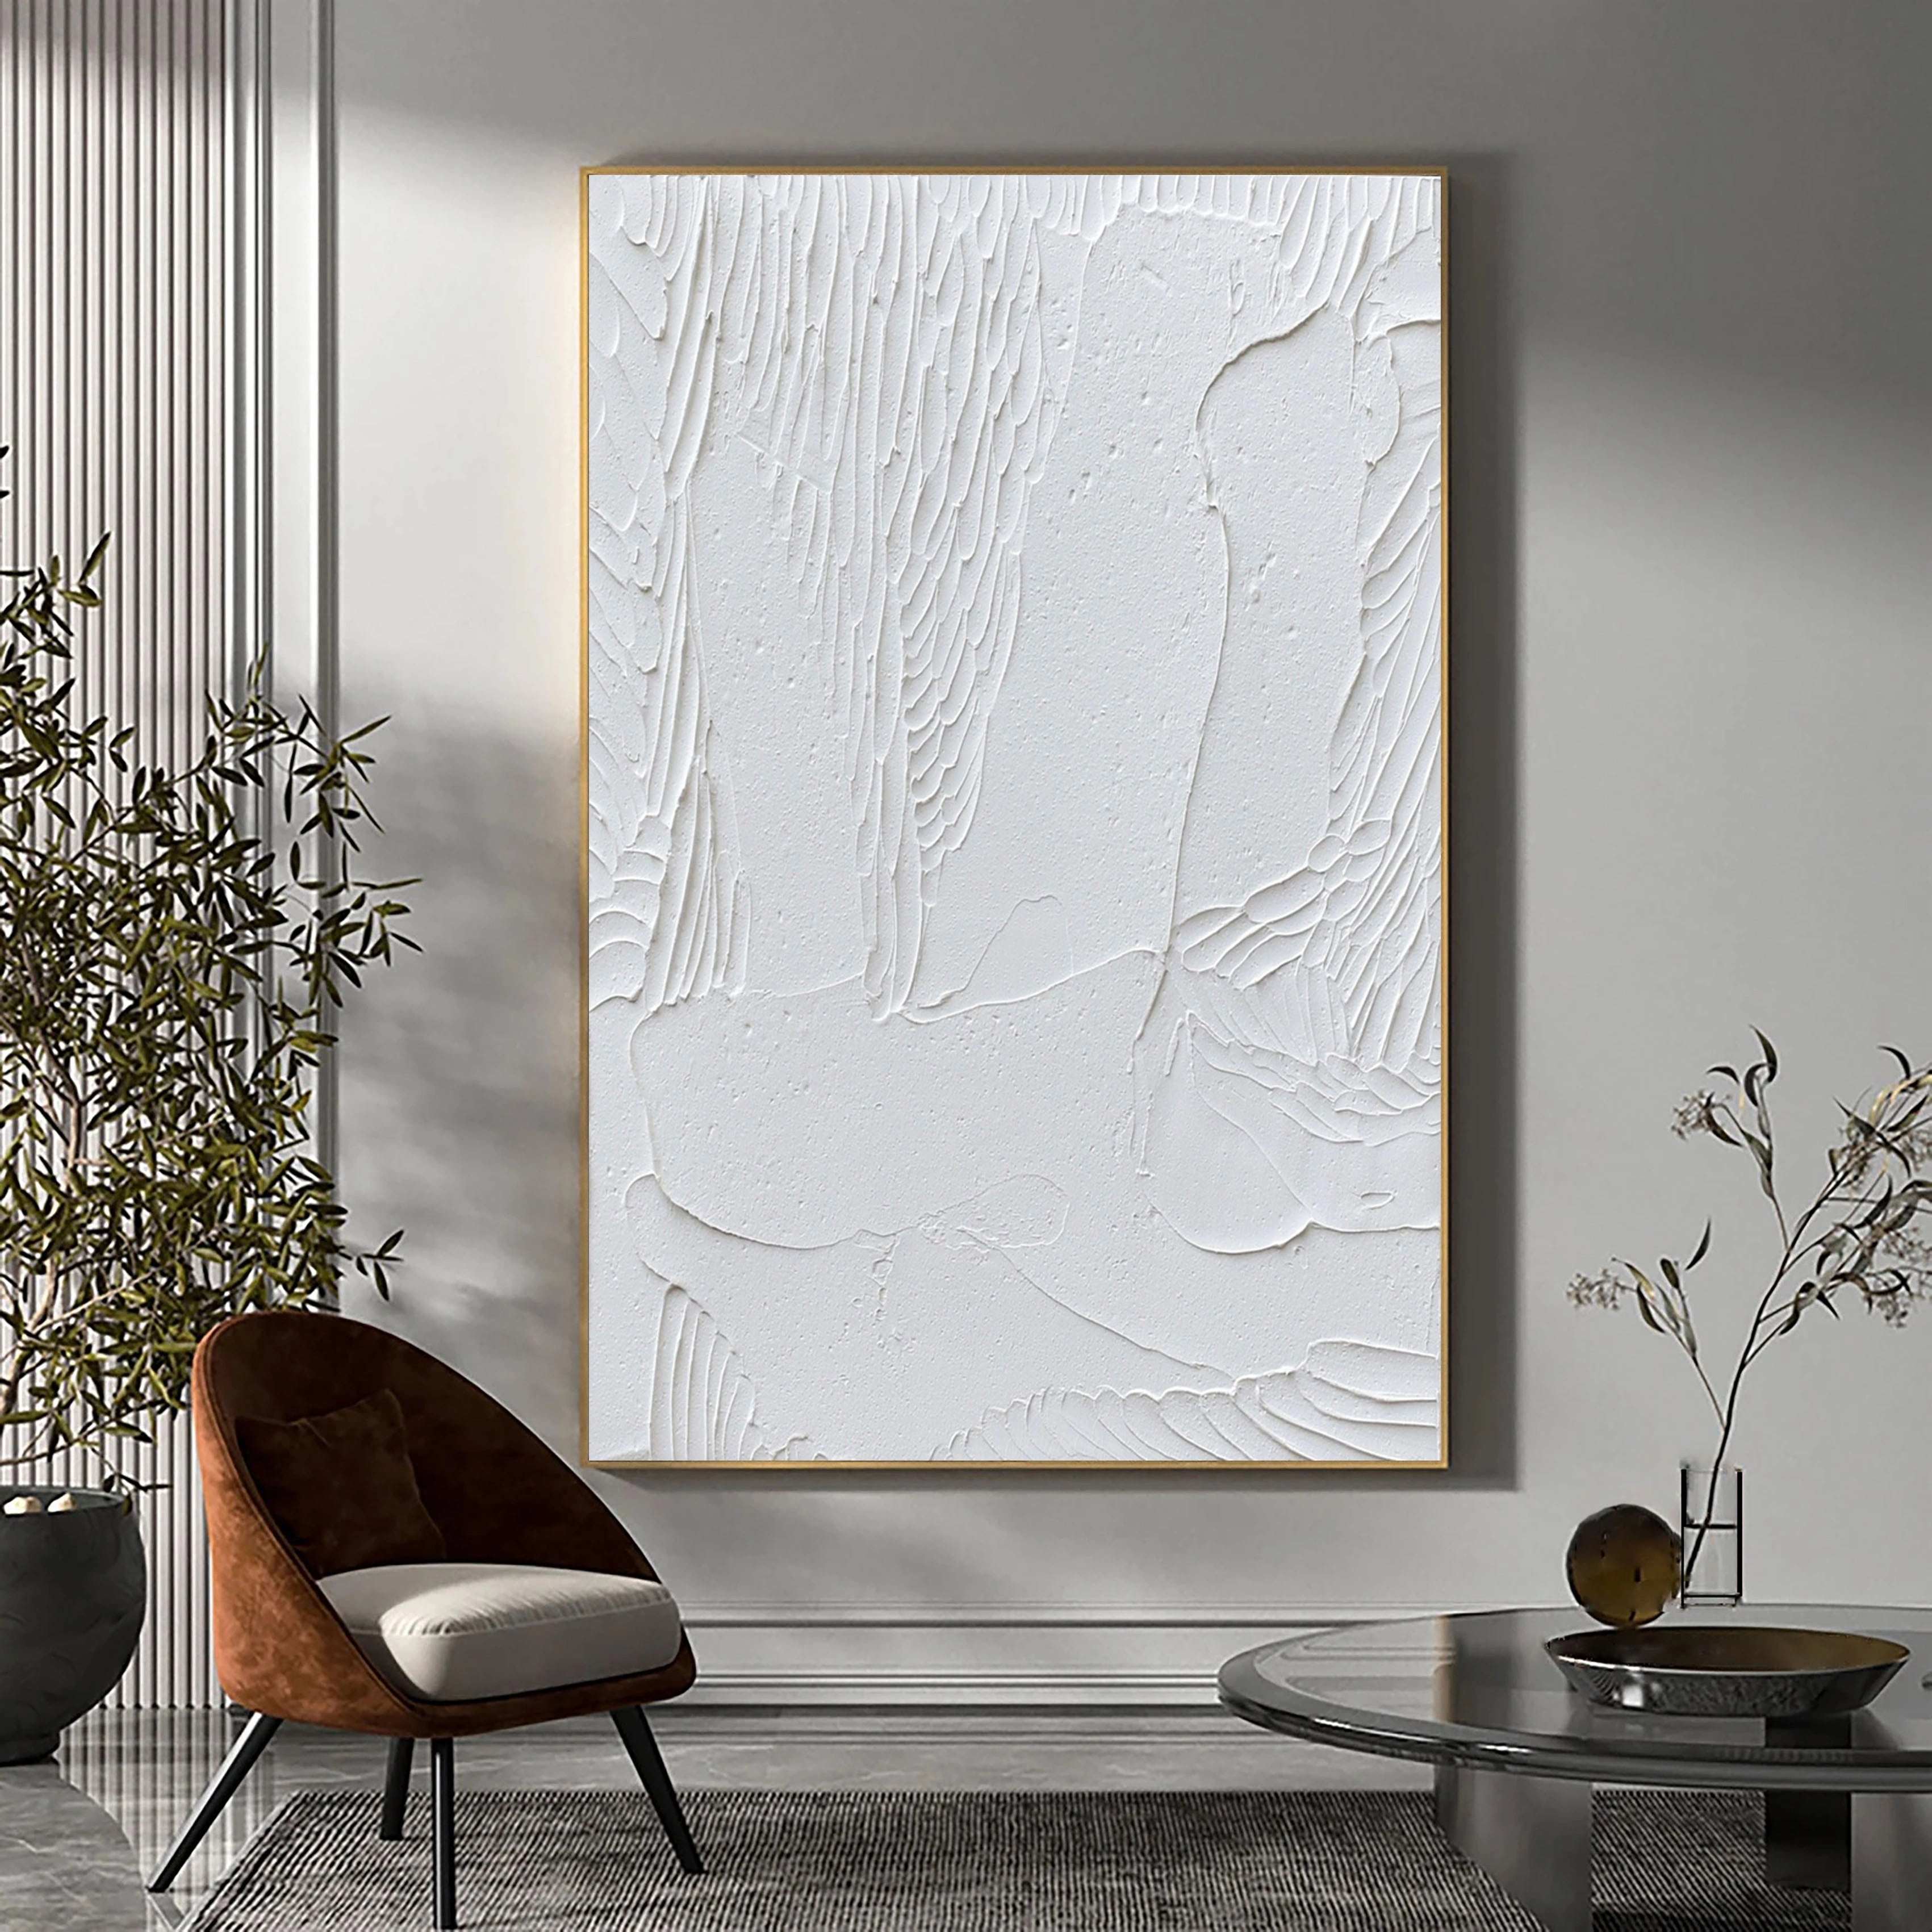 3D Textured White Plaster Art Wall Decor Painting on Canvas Original